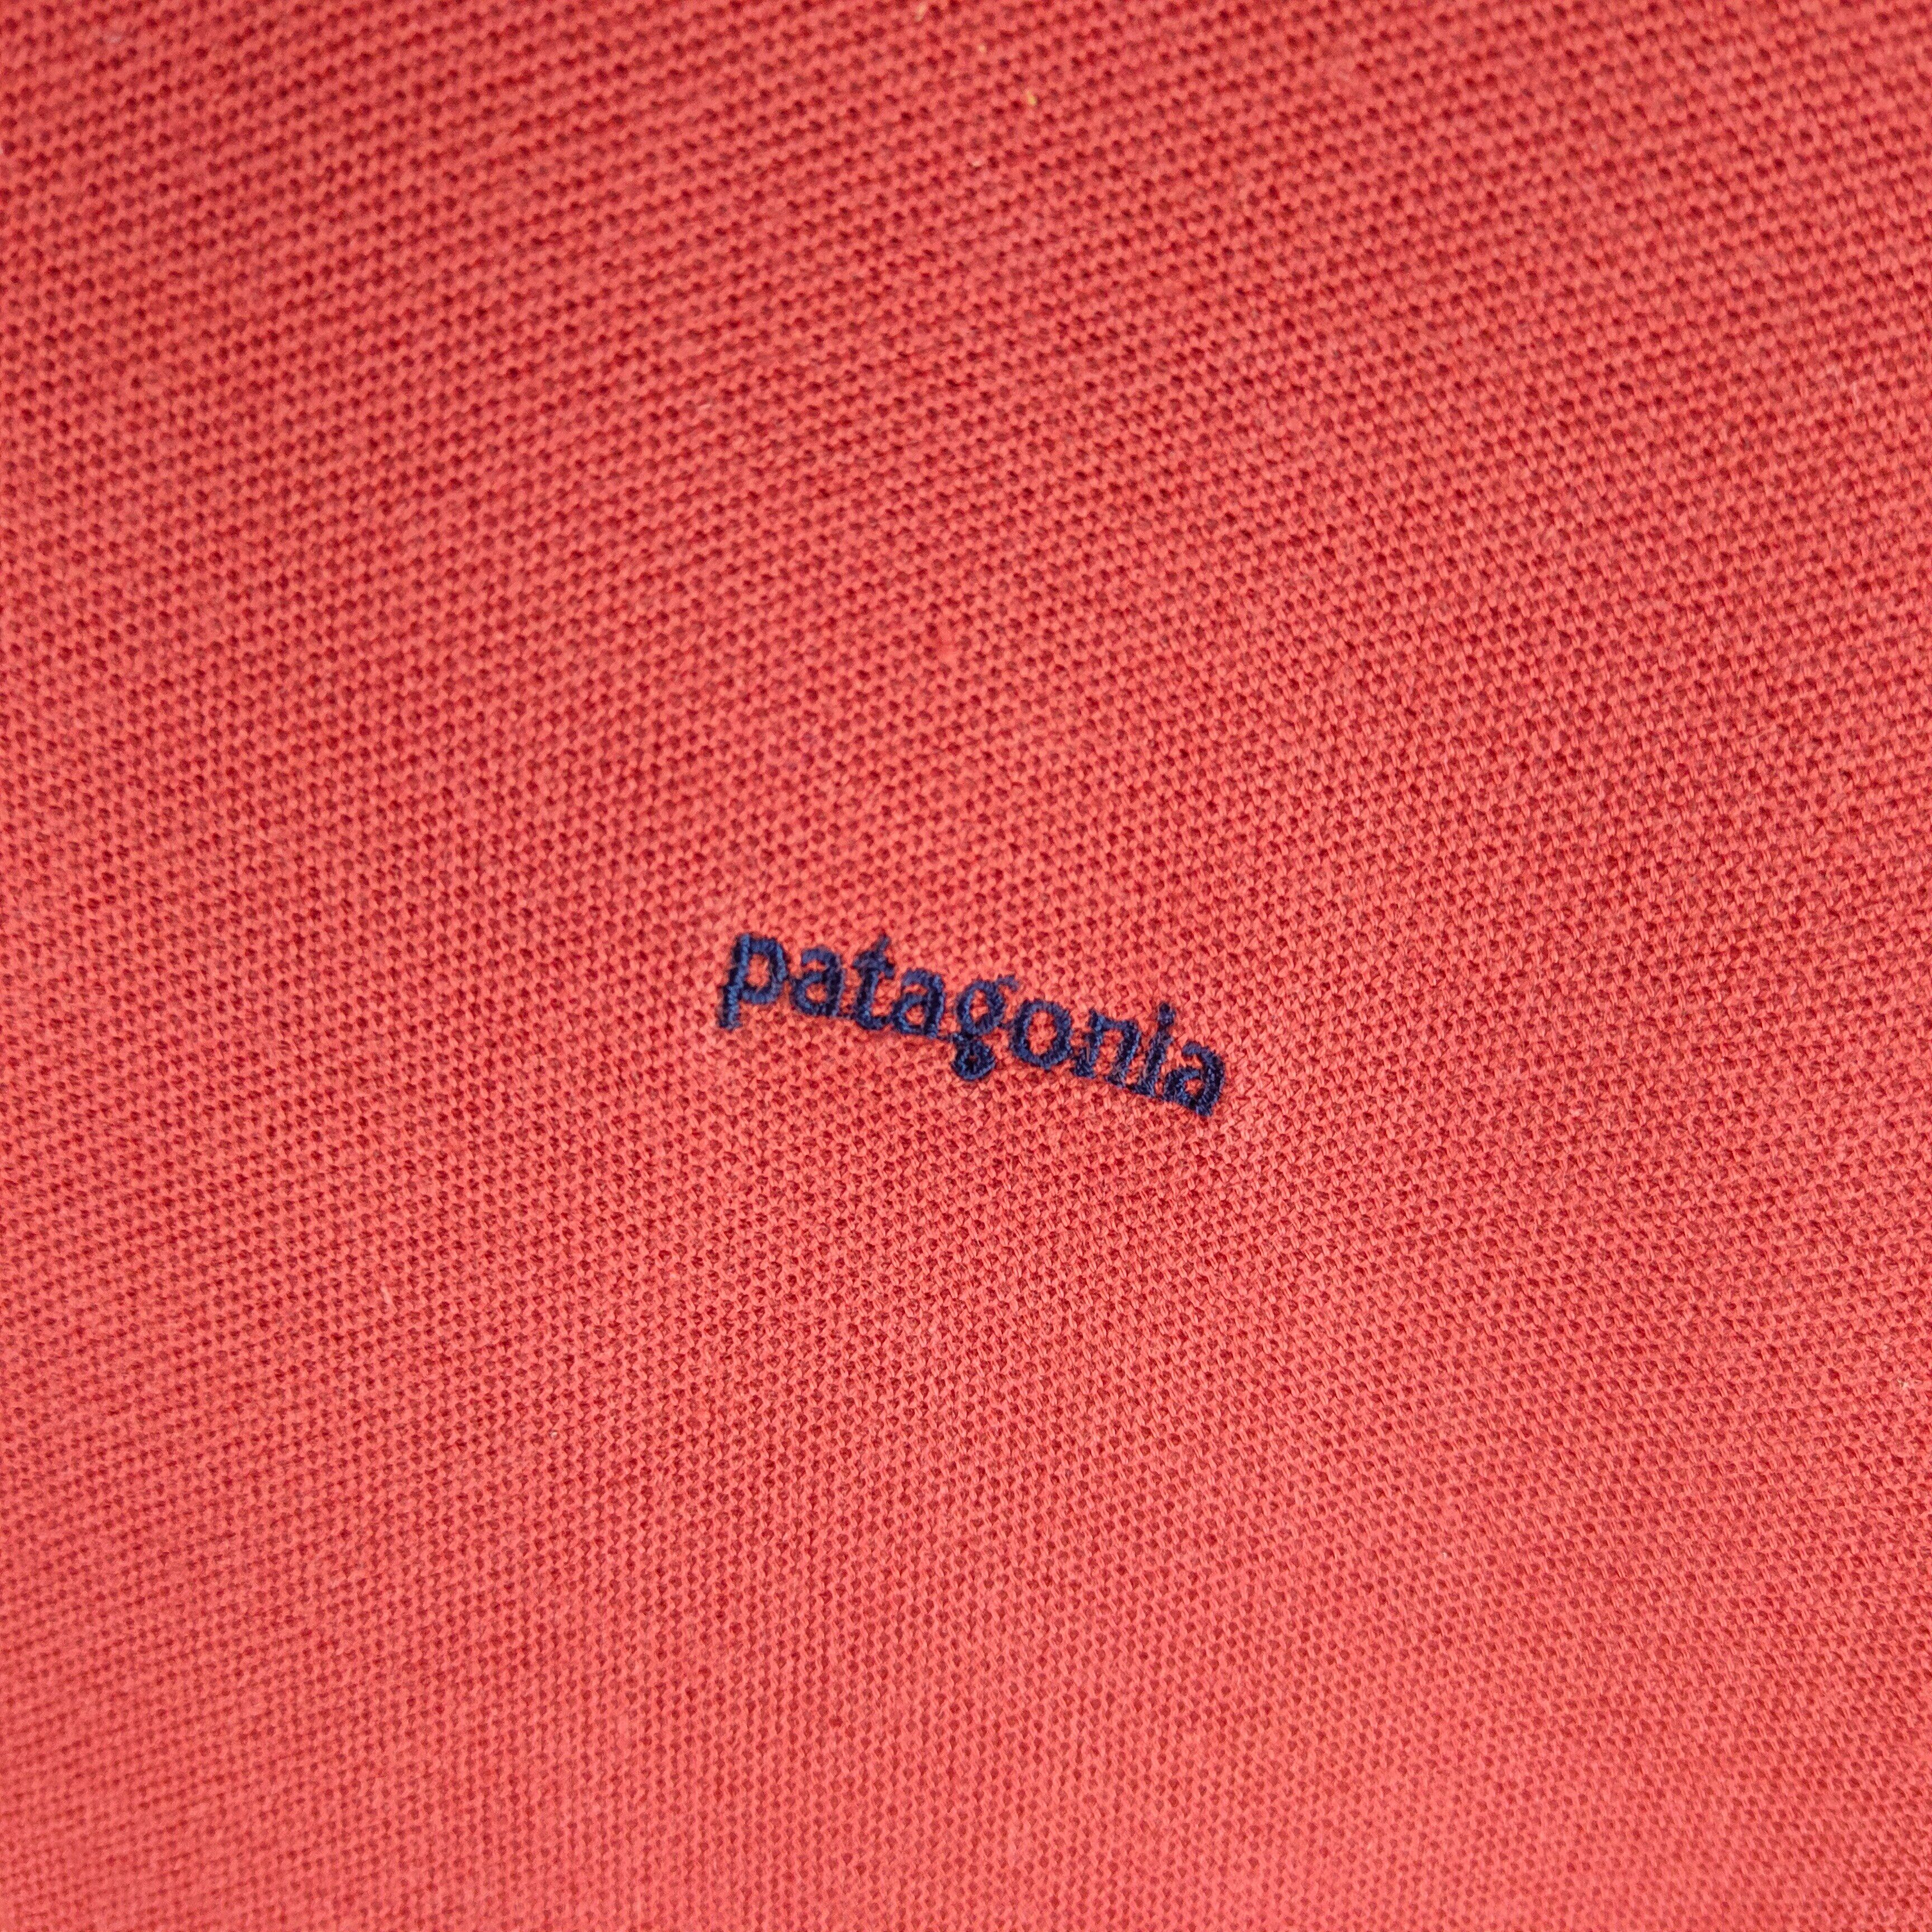 PATAGONIA Embroidery Small Spell Out Polo Shirt - 2